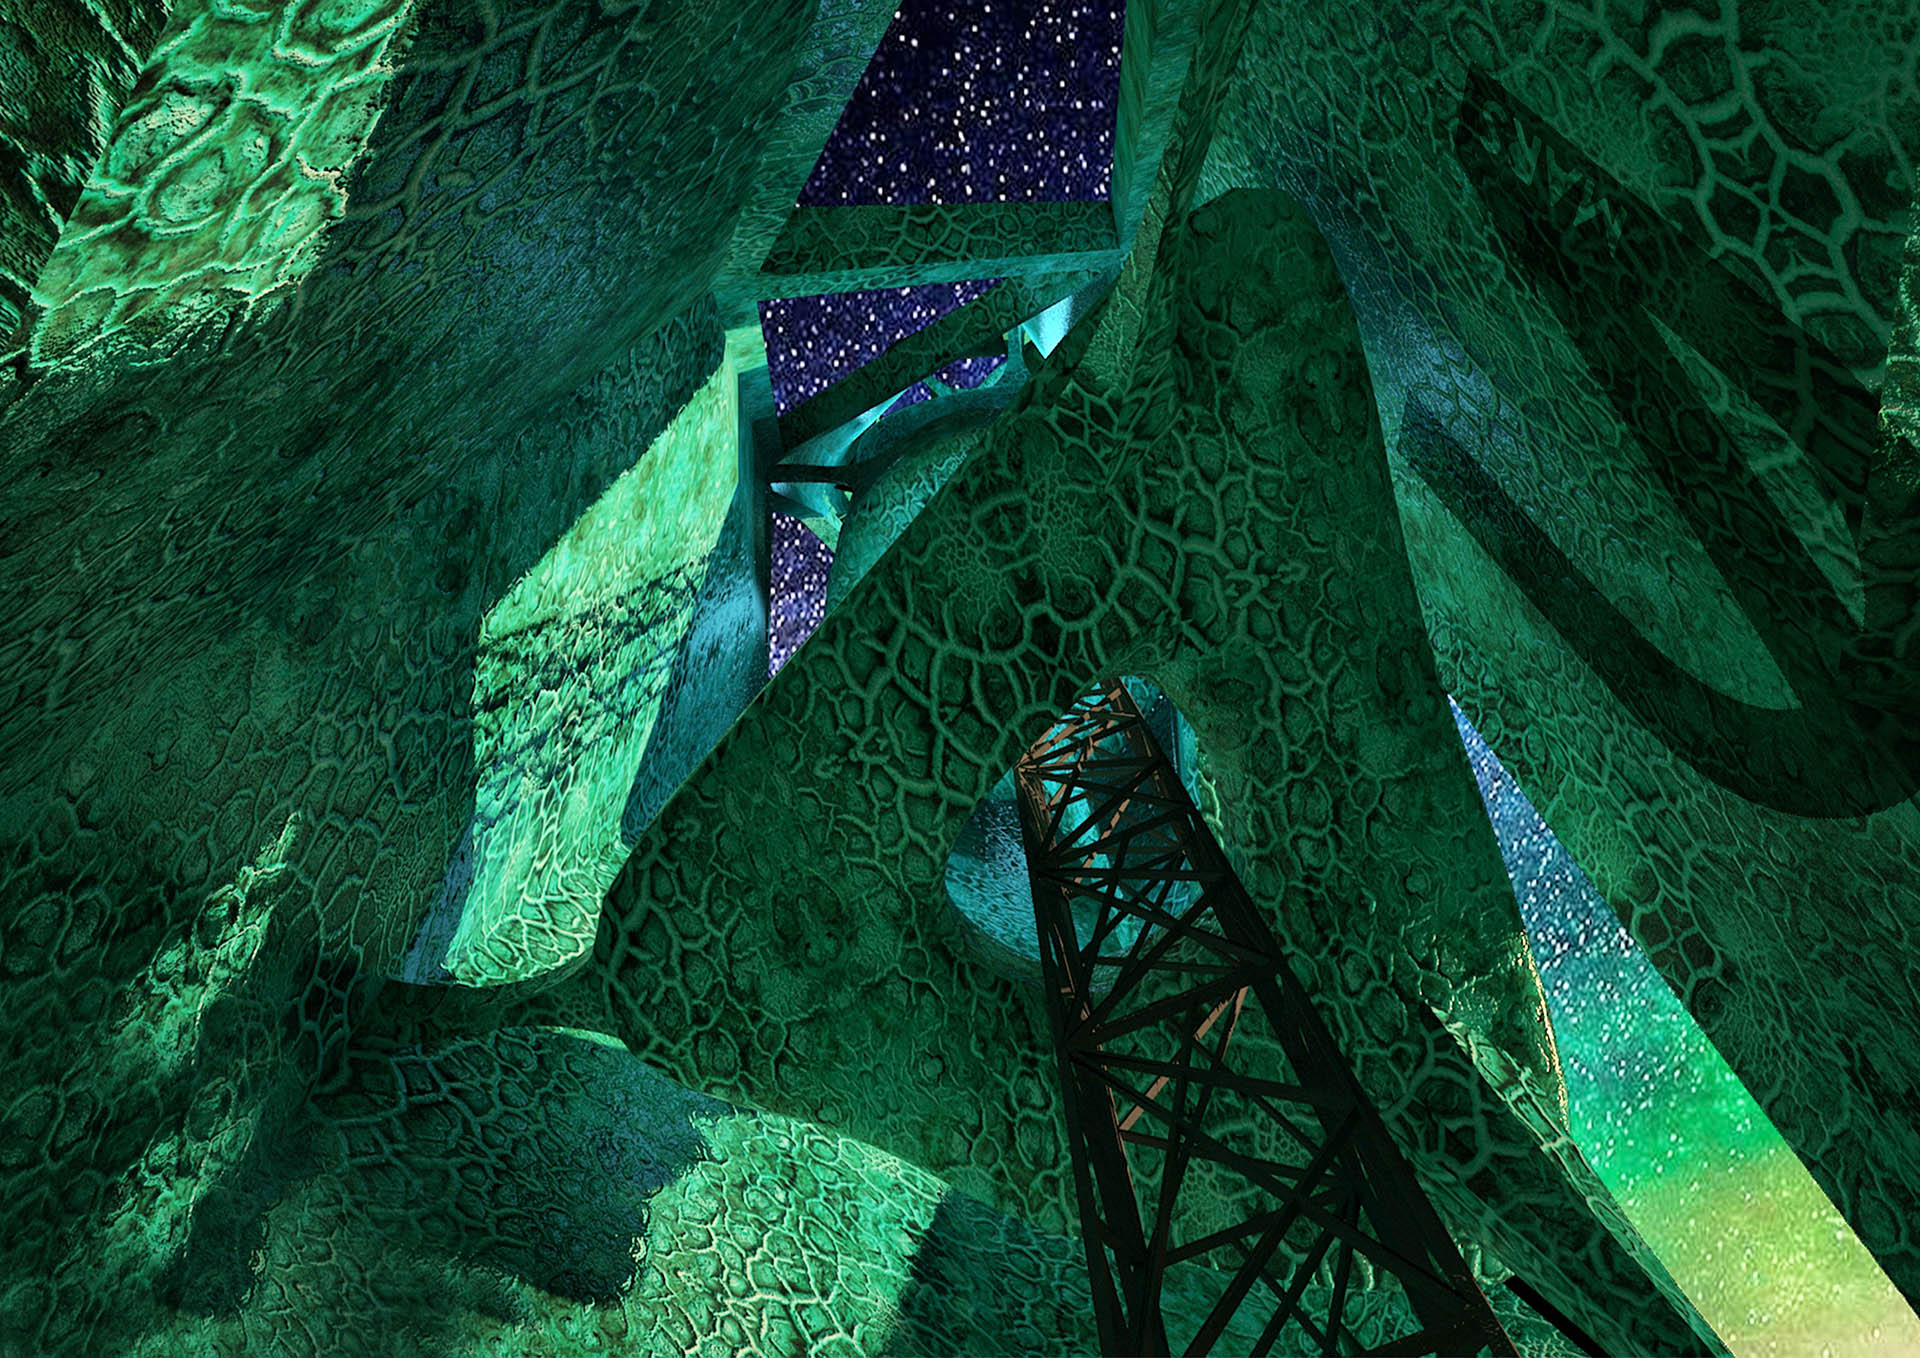 Visual showing interior view from the tower during the night and bioluminescence